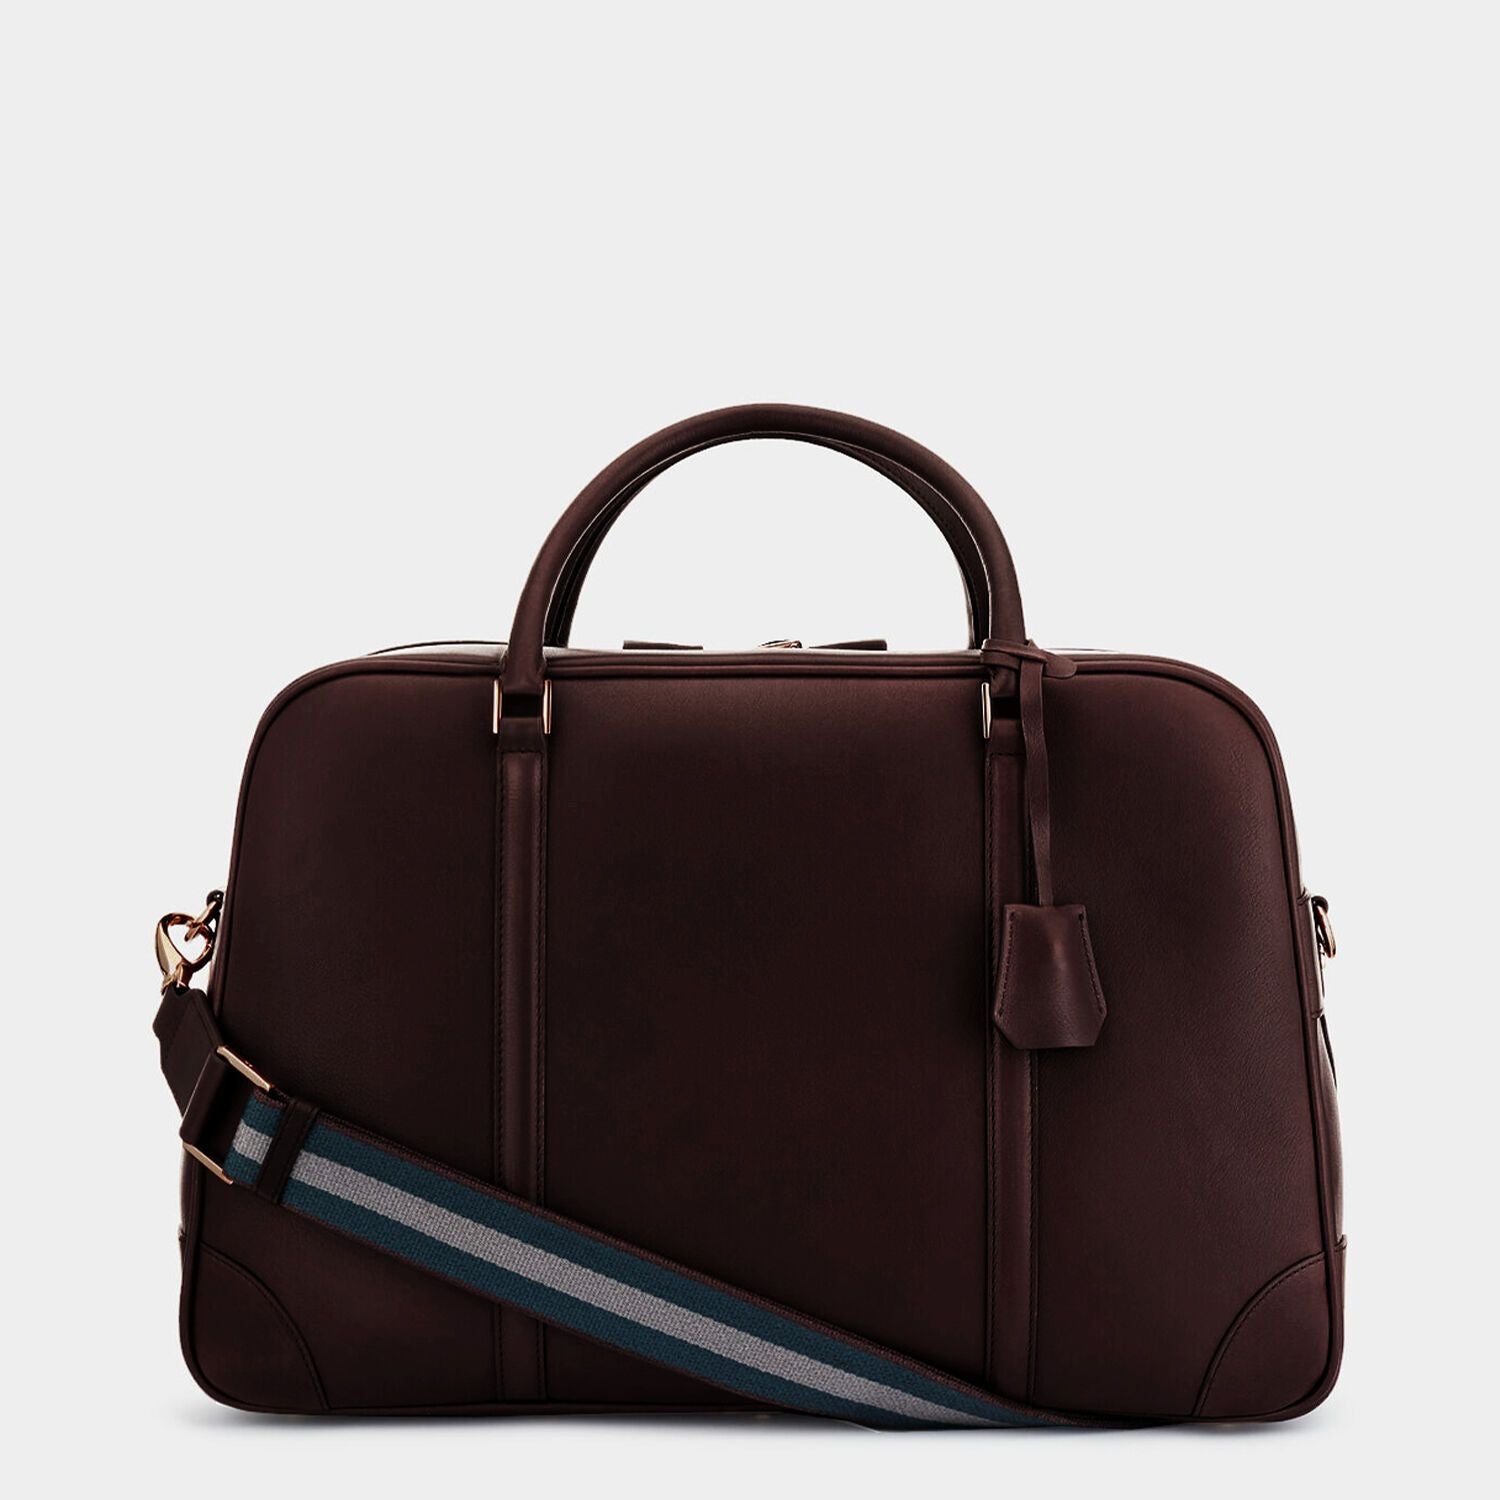 Bespoke Latimer Travel Bag -

                  
                    Butter Leather in Chocolate -
                  

                  Anya Hindmarch US
